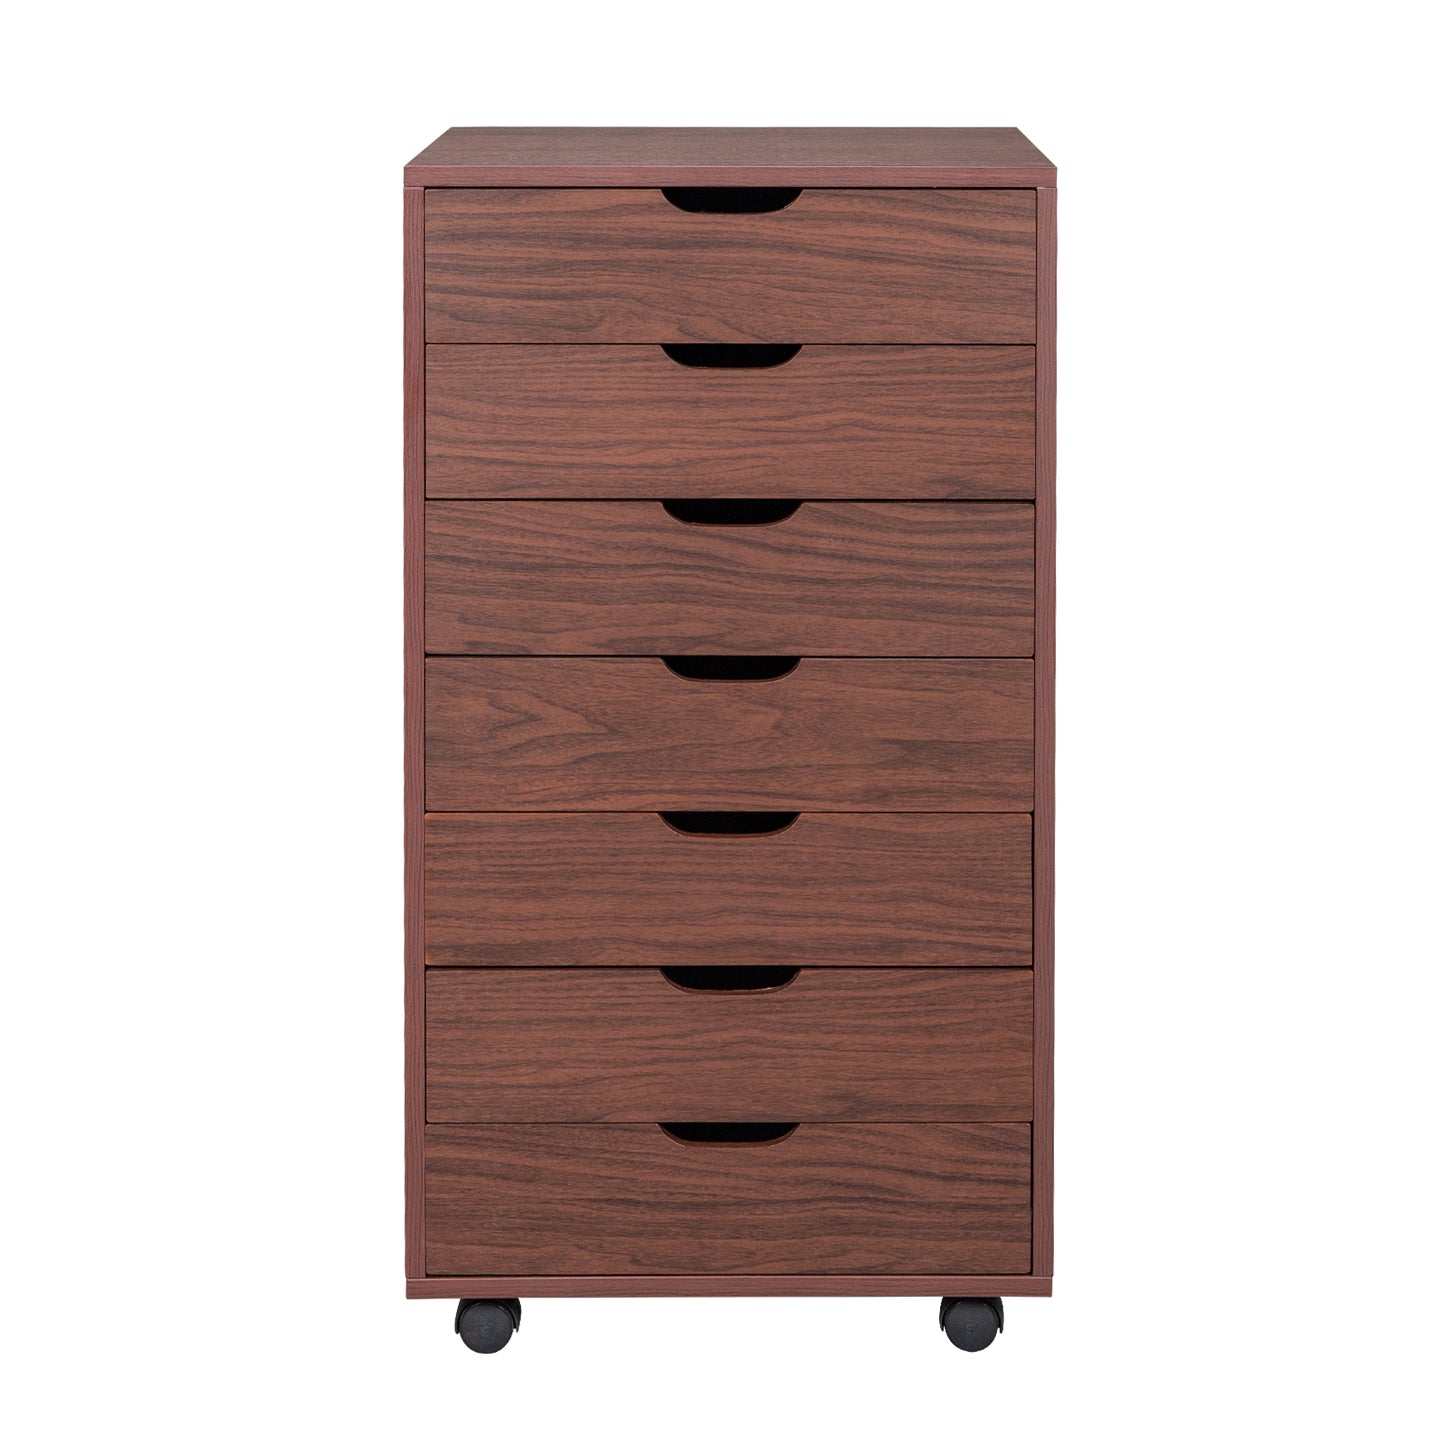 SYNGAR 7 Drawer Walnut Dresser, Modern Chest of Drawers with Wheels and Large Storage Capacity, Floor Storage Cabinet Closet for Living Room, Bedroom, Hallway, Nursery